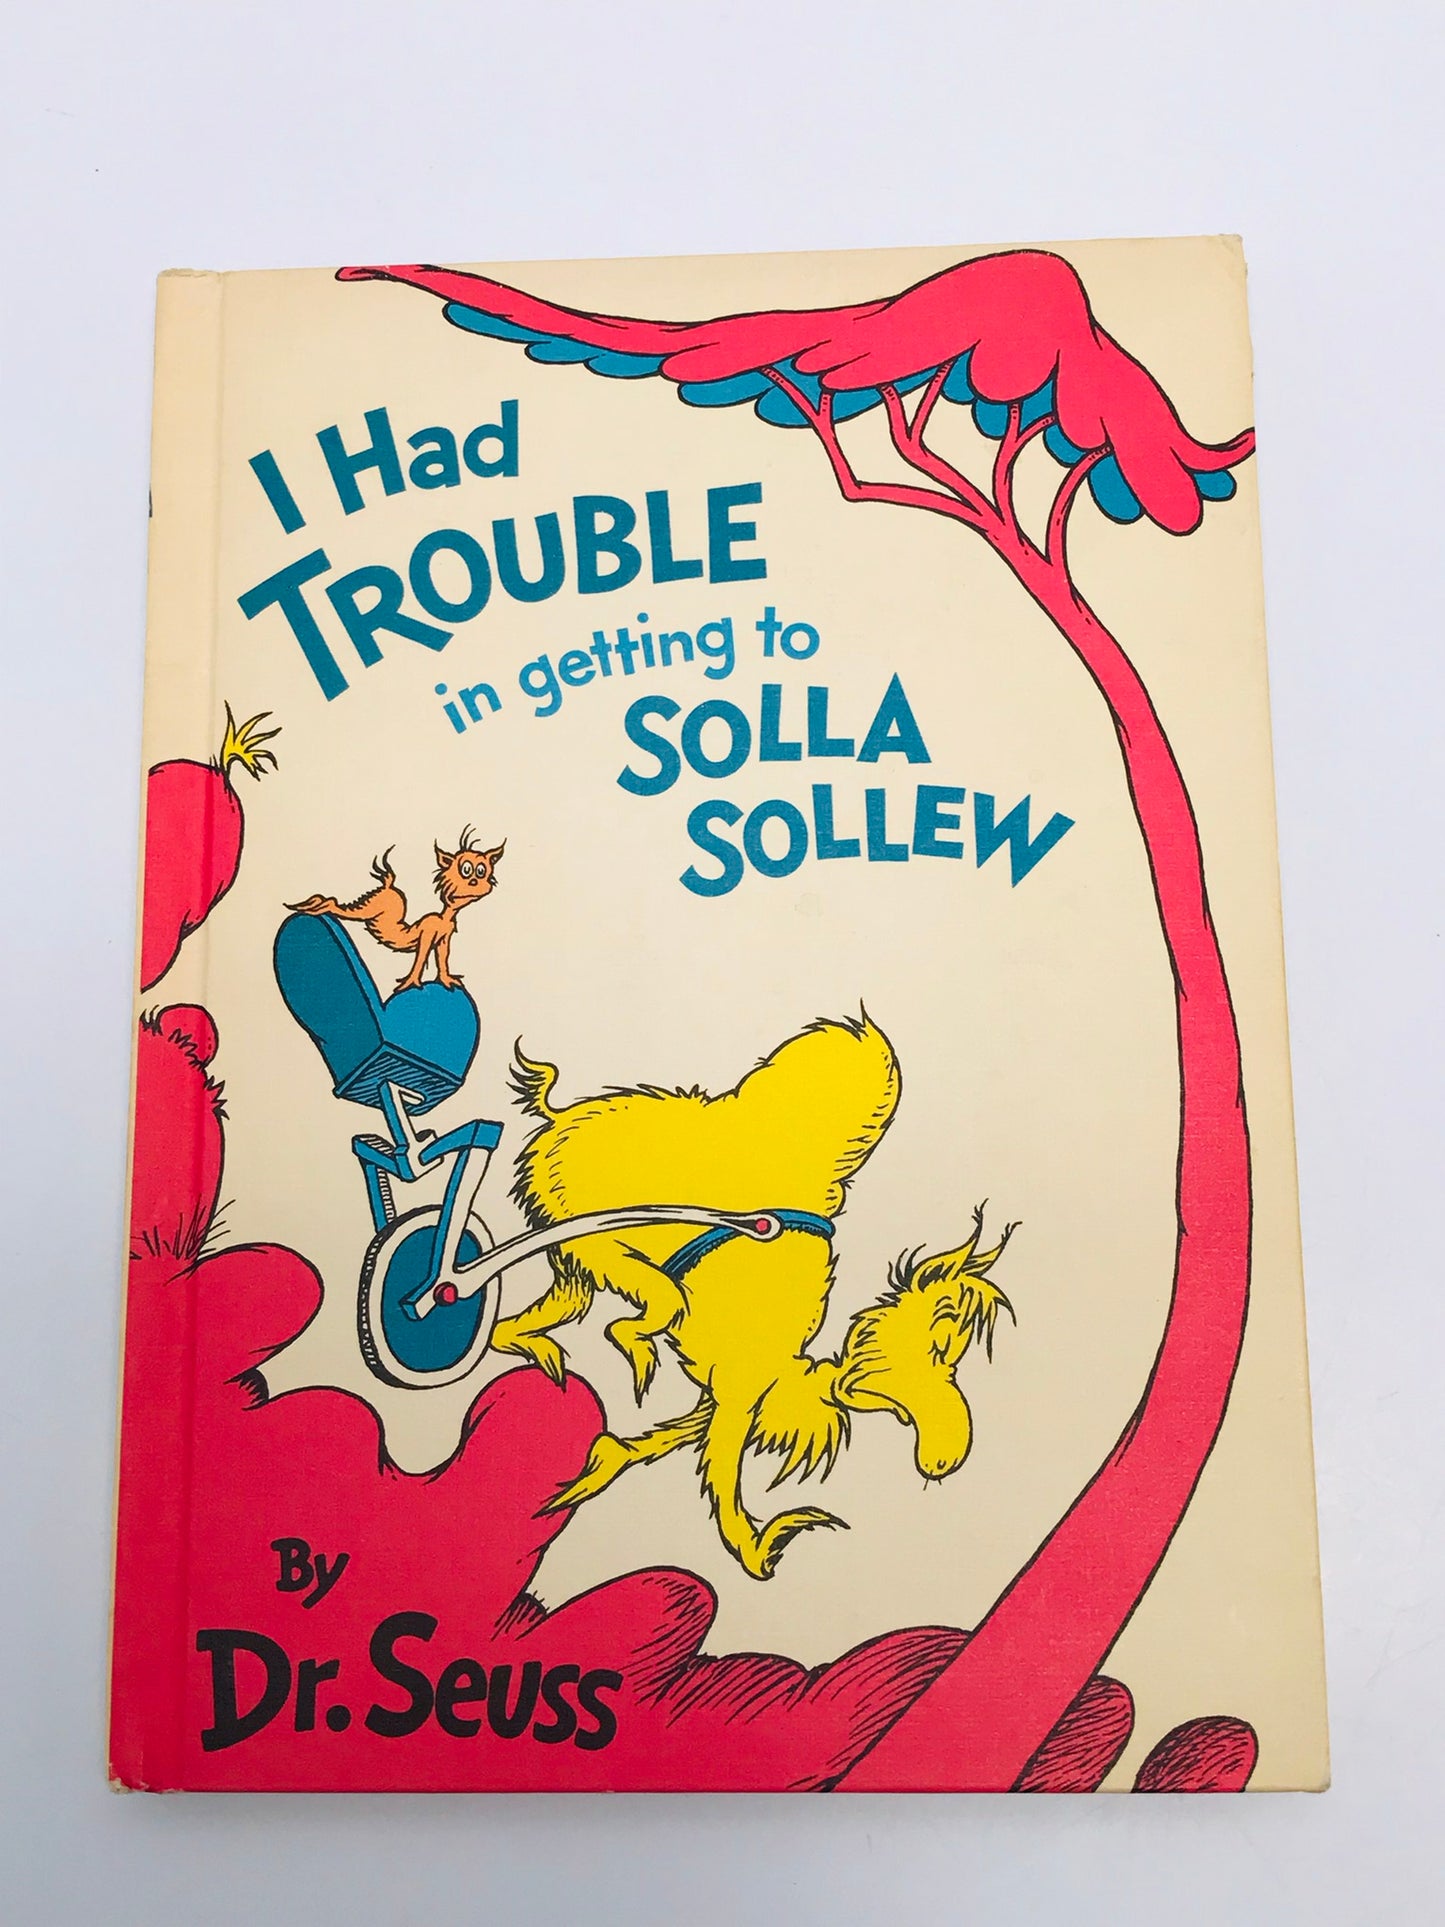 1950-1971 Set Vintage Large RARE Dr Seuss Hard Covered Books Boxed In Attic Over 50 Years Like New